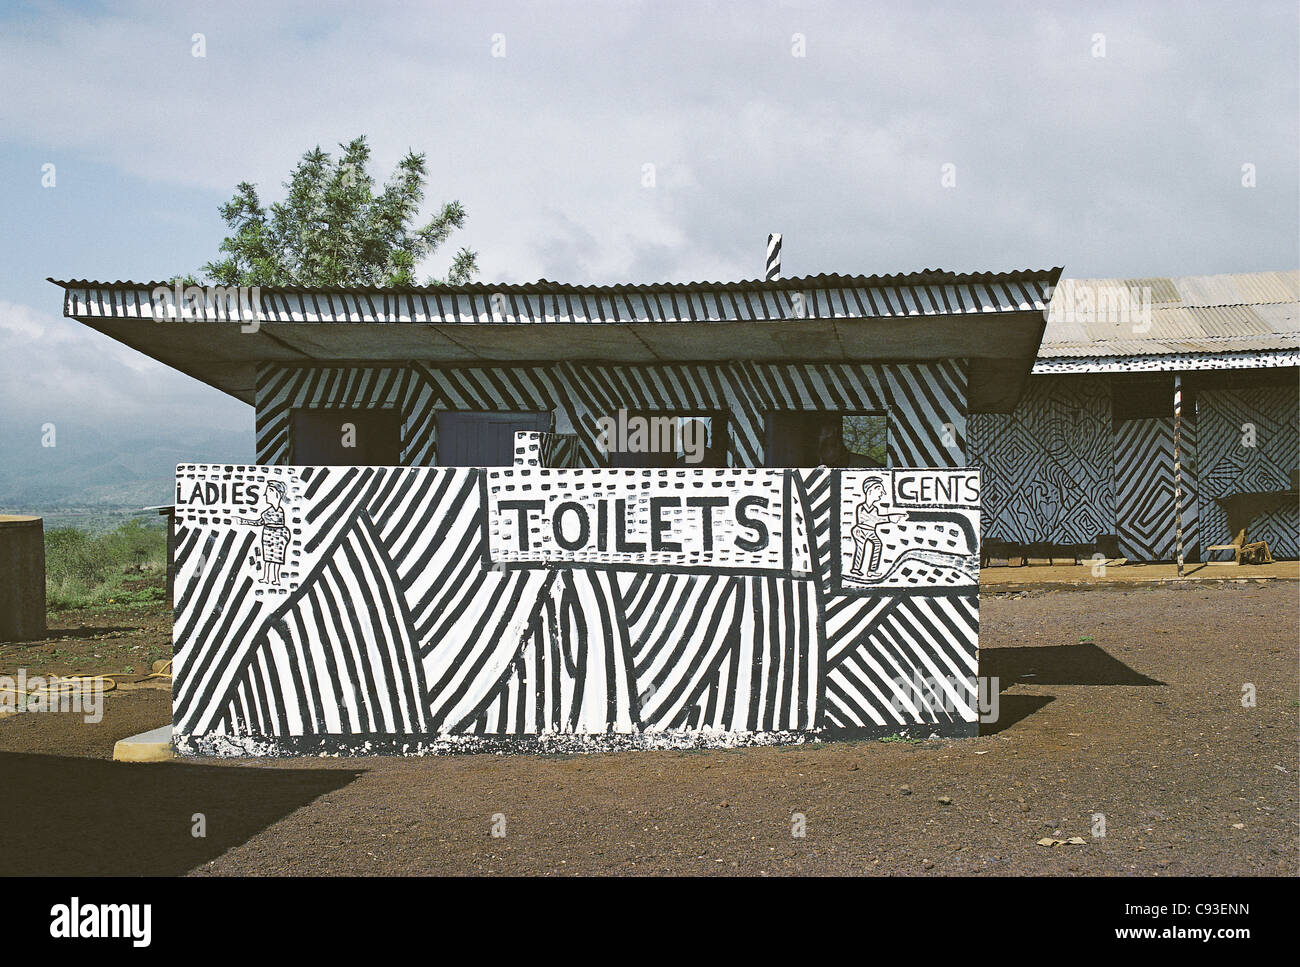 Toilets decorated with zebra black and white stripes with Gents male and Ladies female entrances near Lake Manyara Tanzania Stock Photo